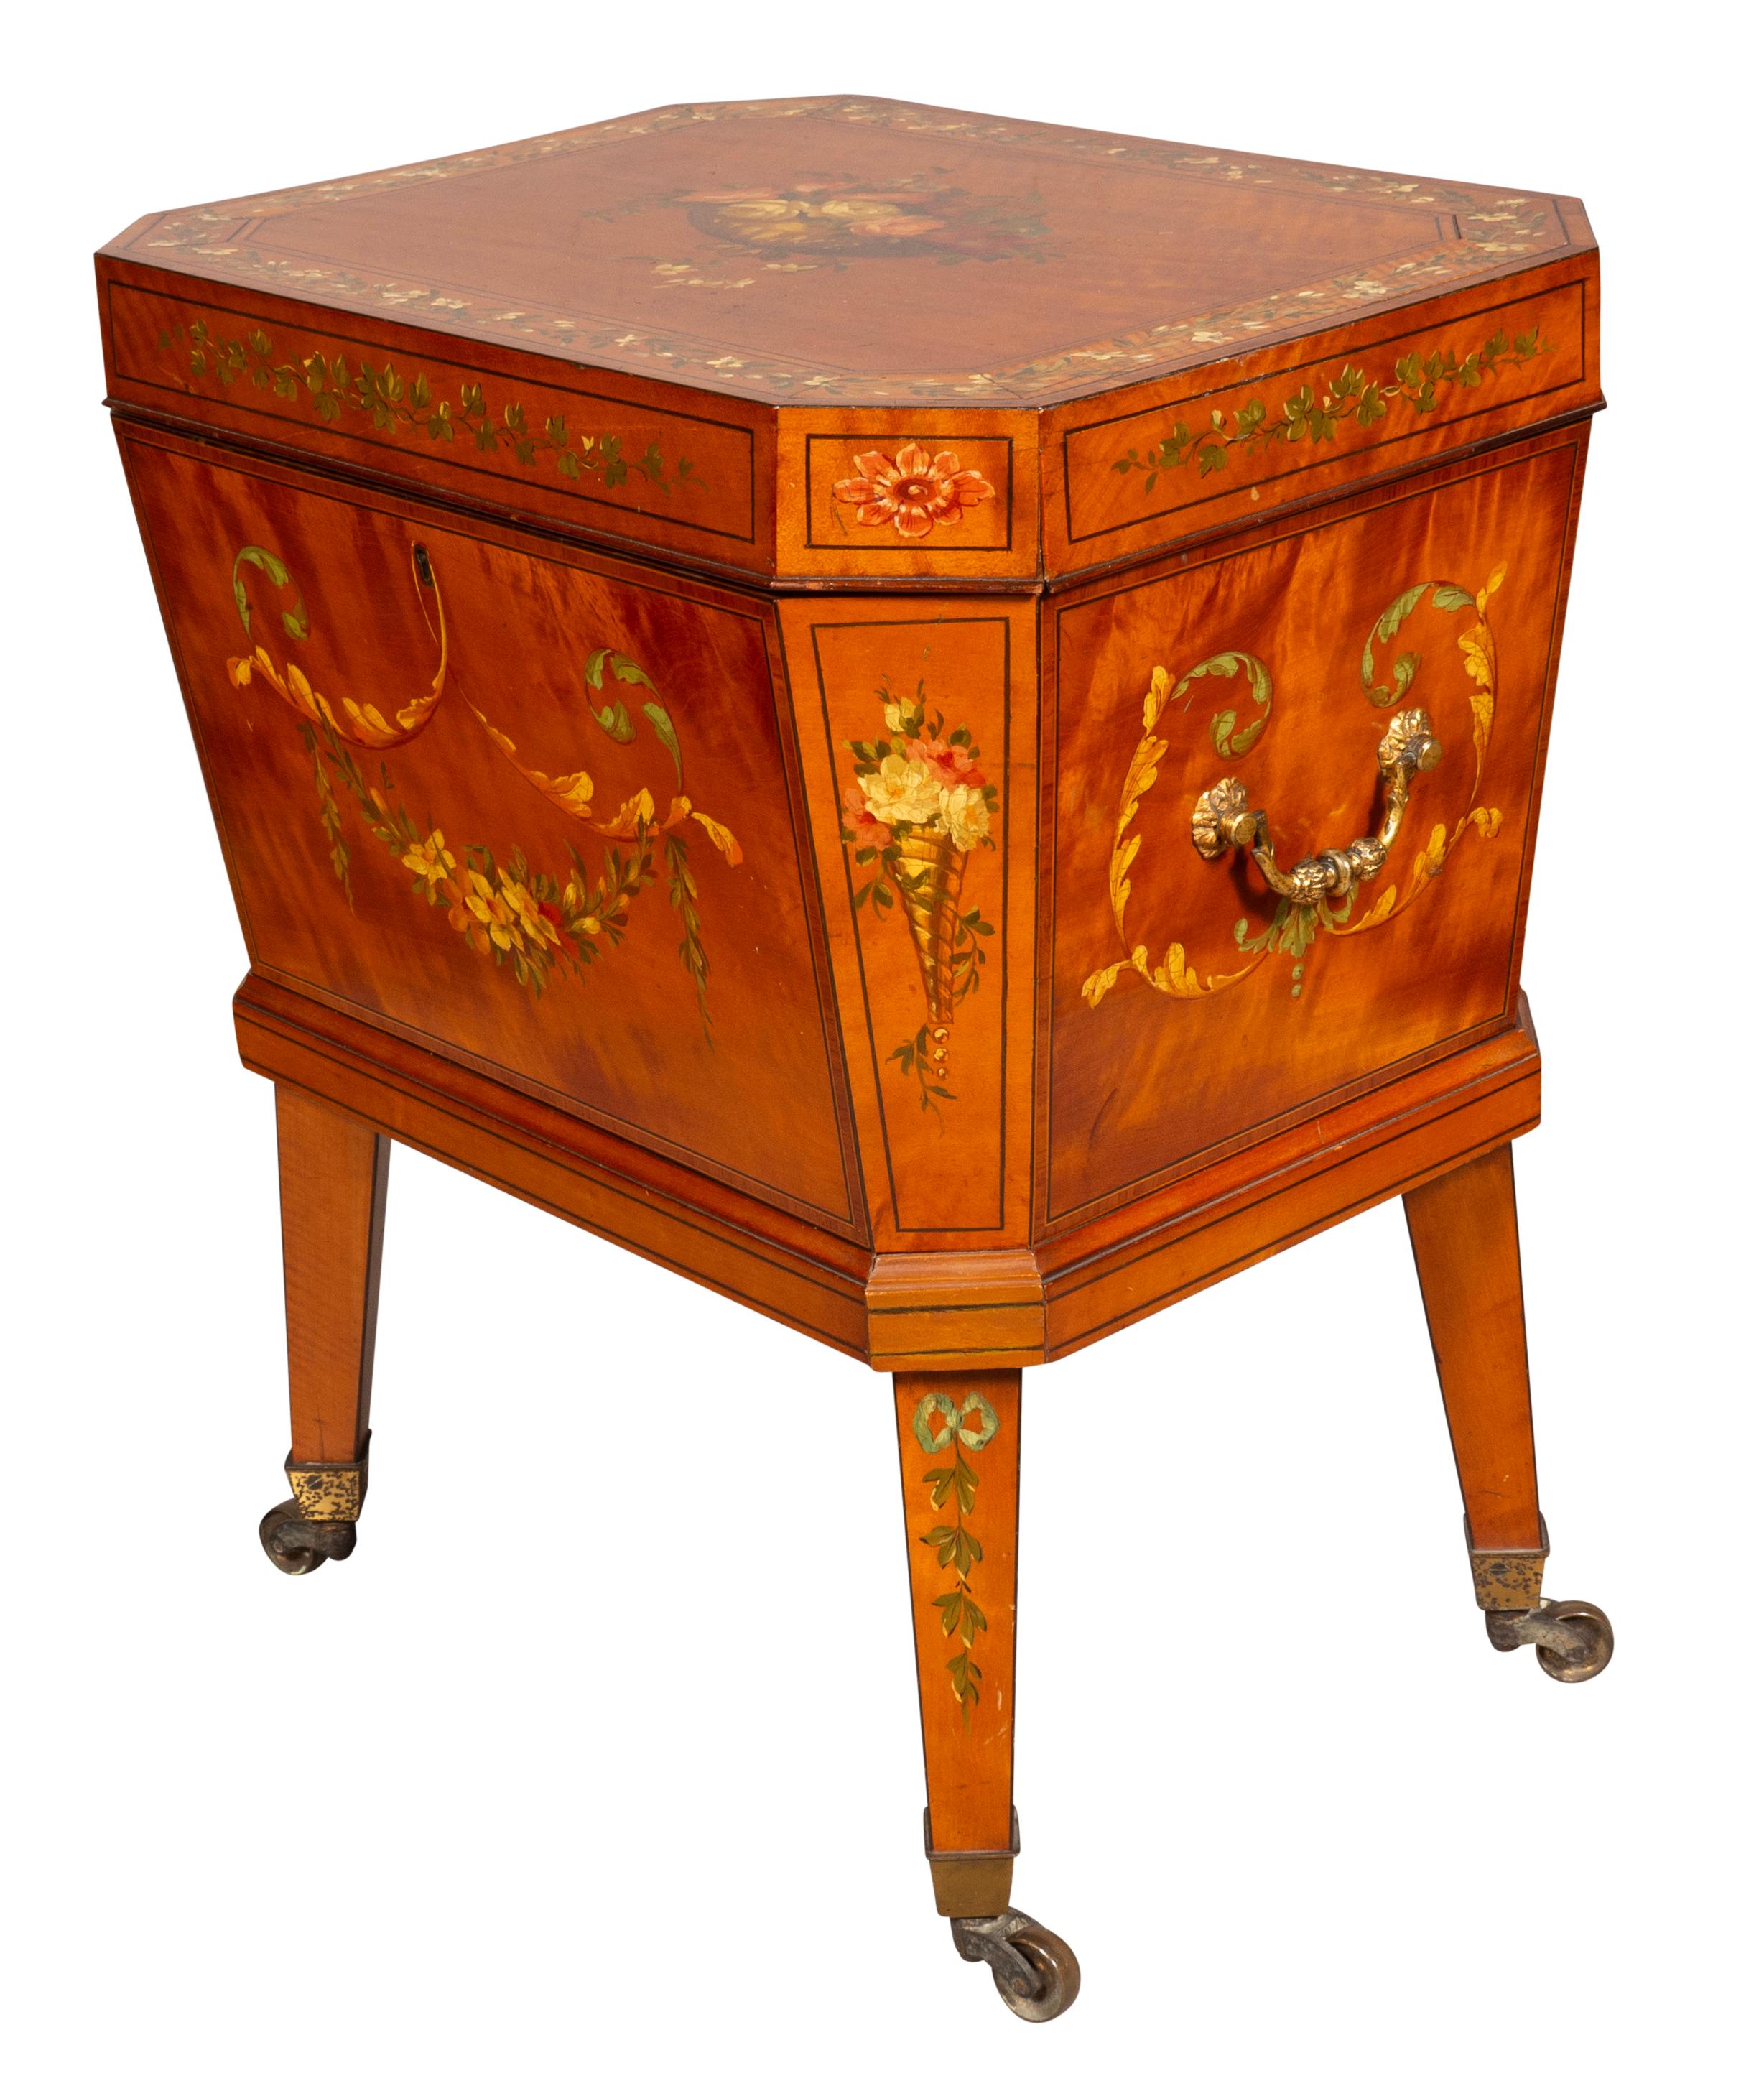 19th Century Edwardian Satinwood And Painted Wine Cooler For Sale